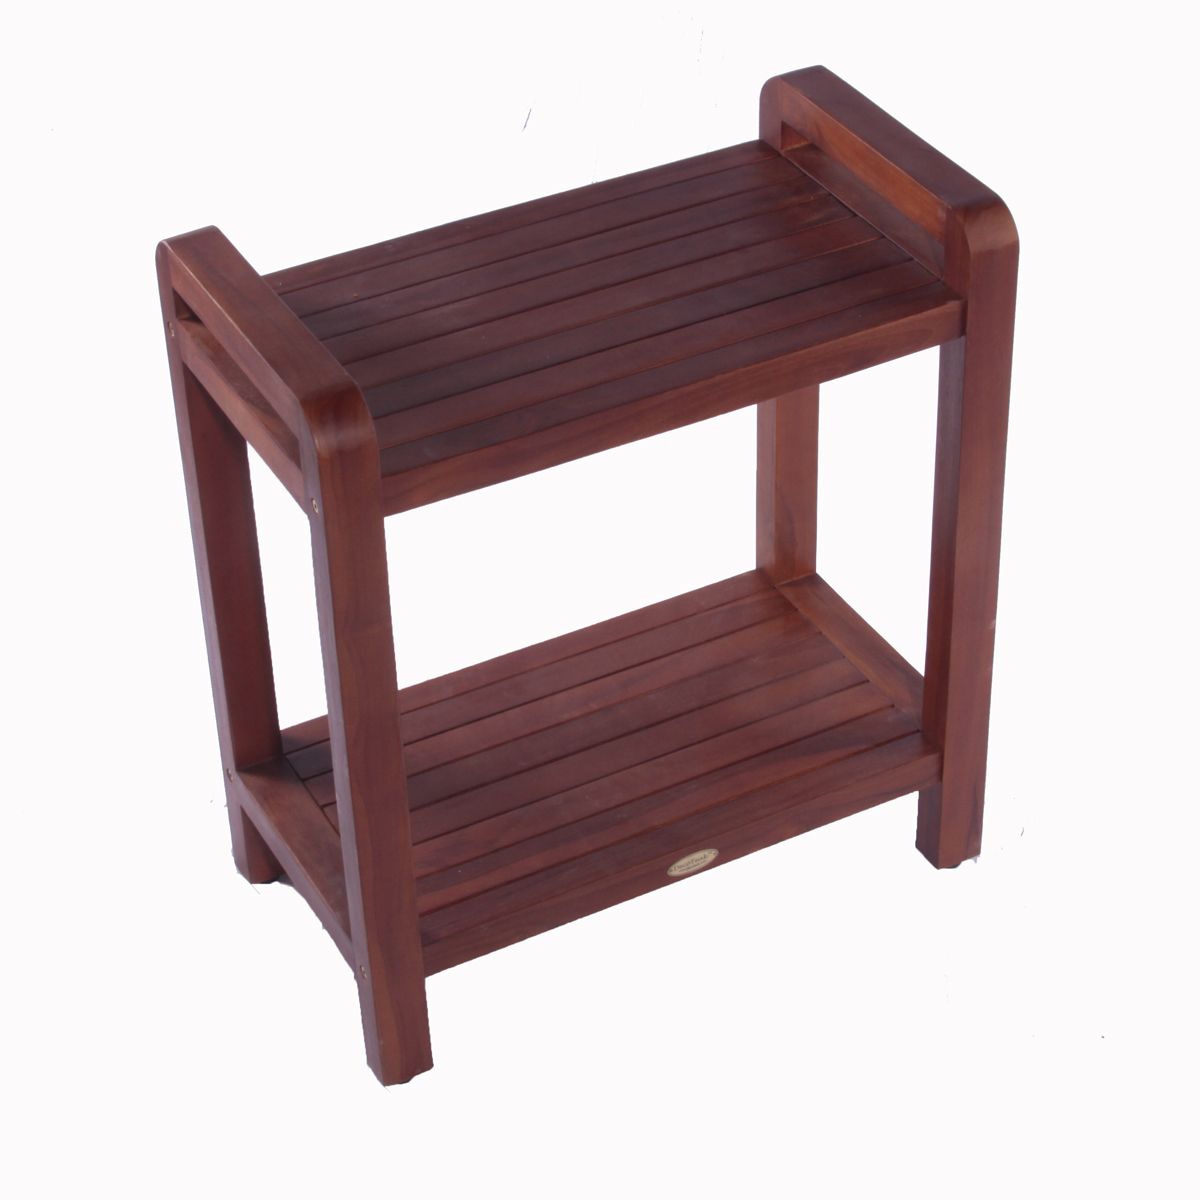 DT109 24" Classic Teak Extended Shower Bench with Shelf and Arms